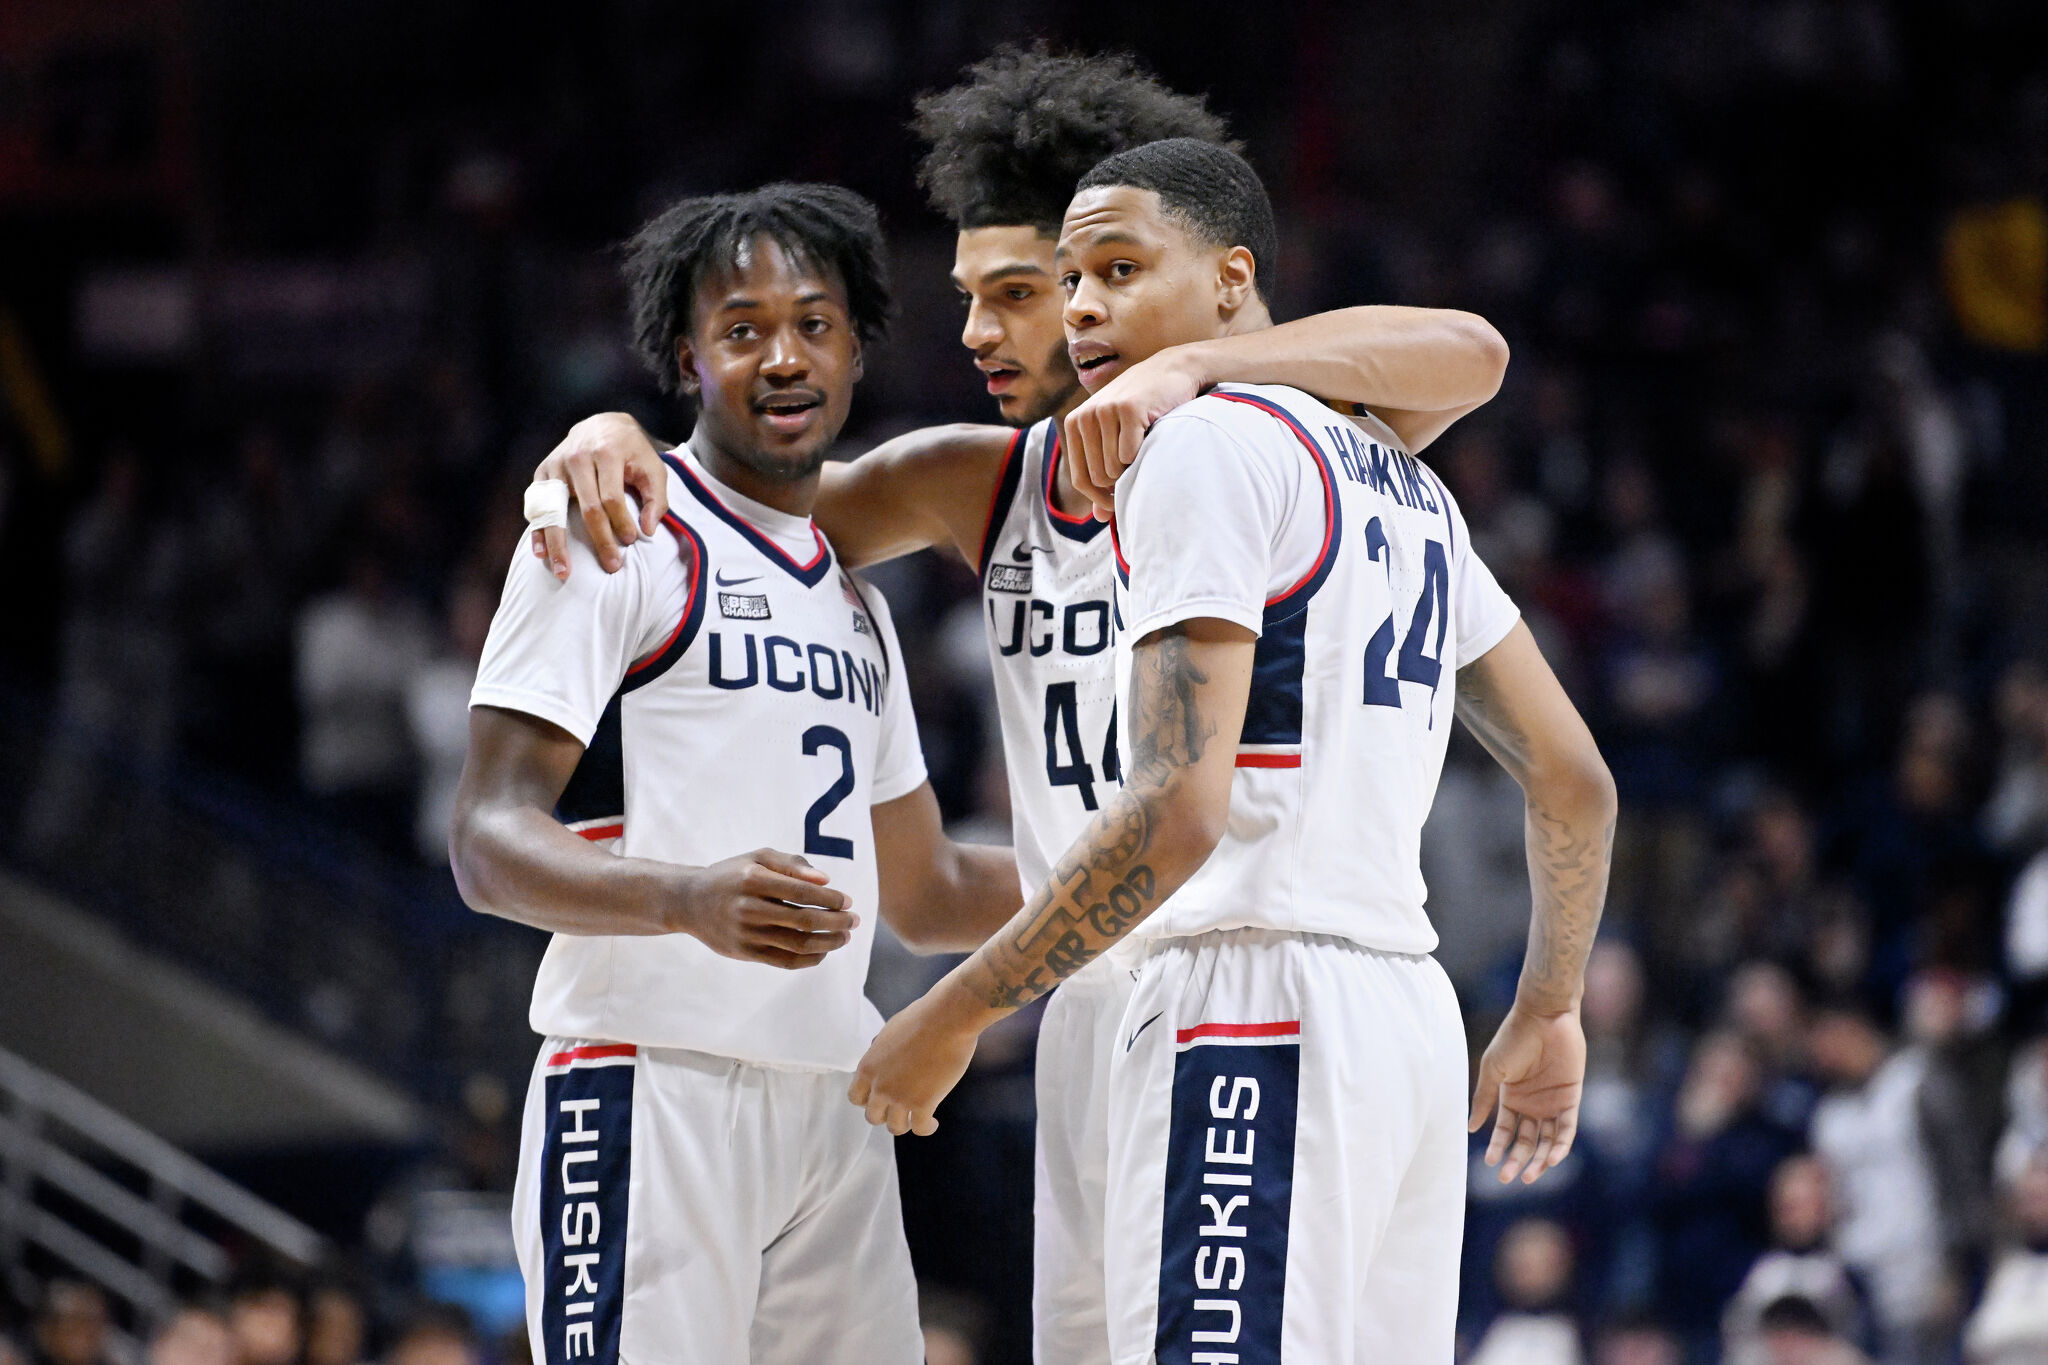 Could UConn men's basketball team be favorite to win Big East